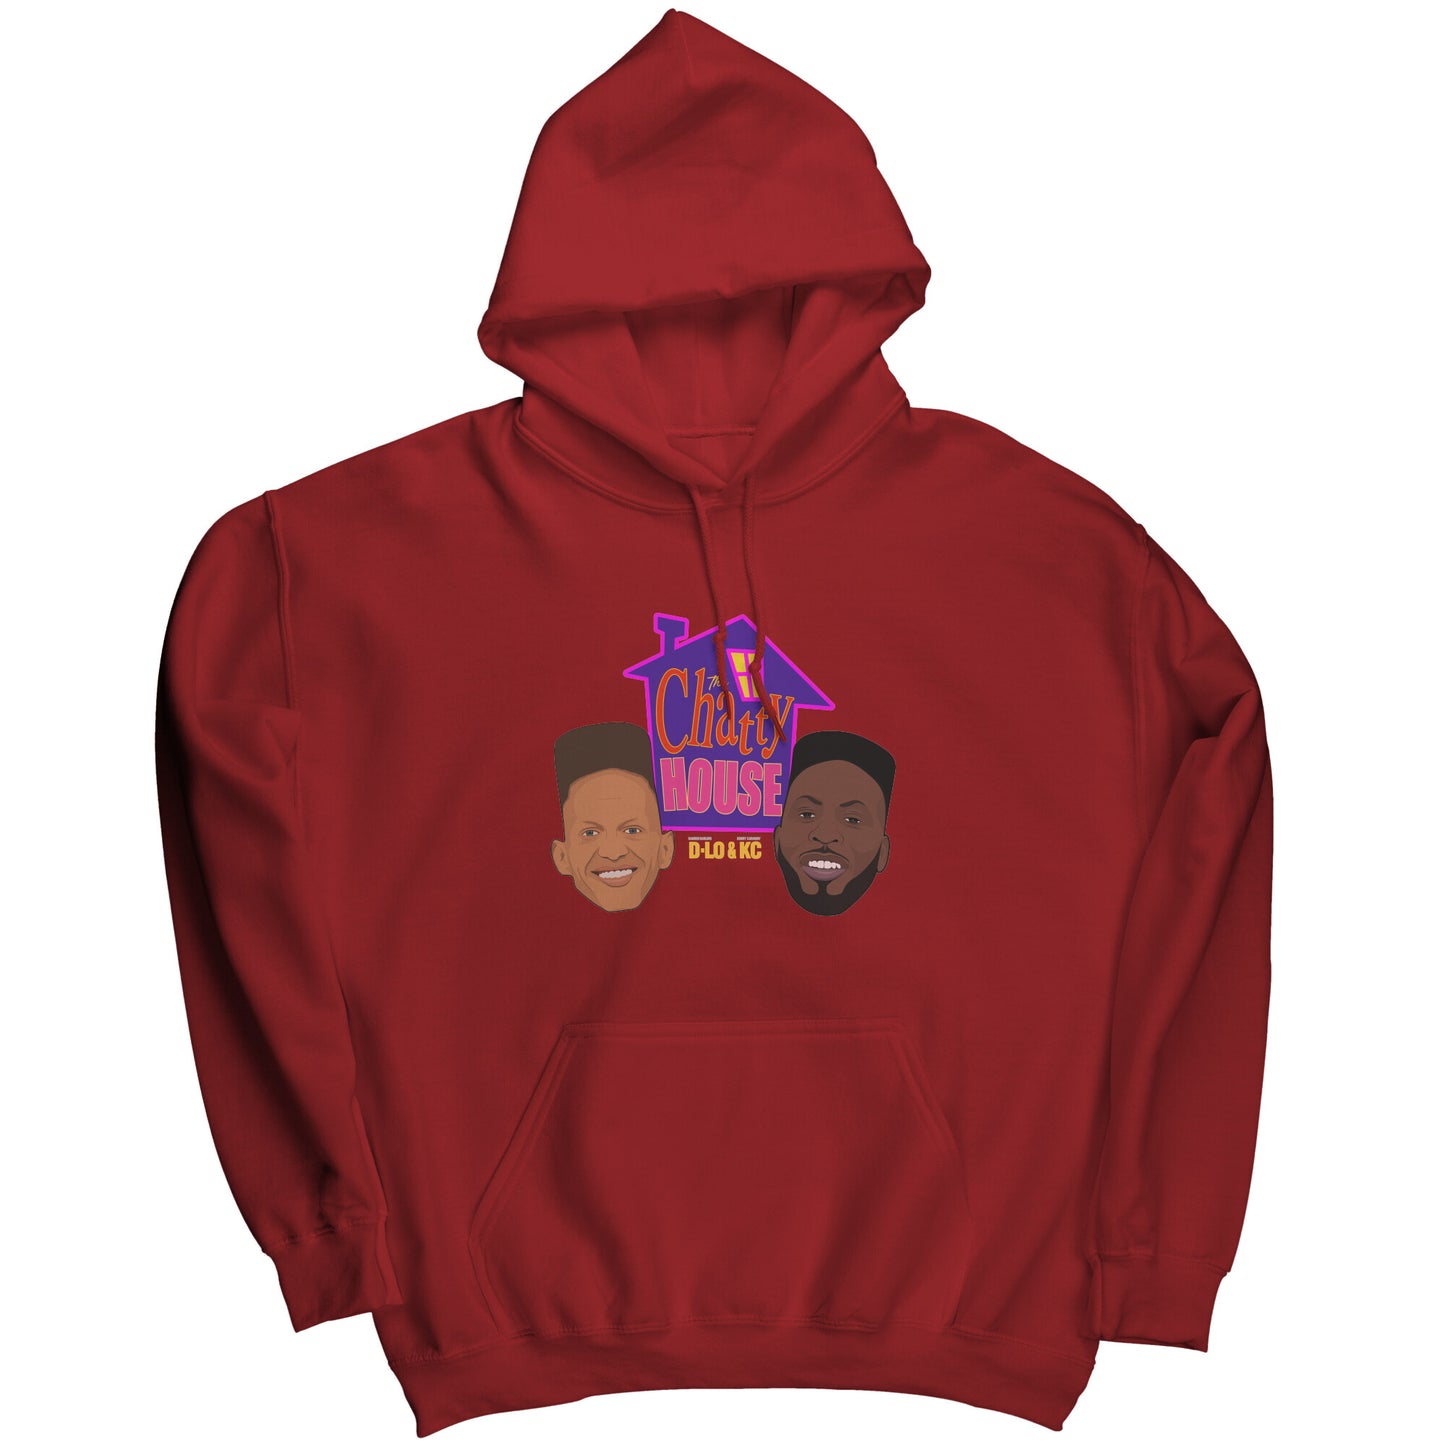 Chatty House Party Hoodie